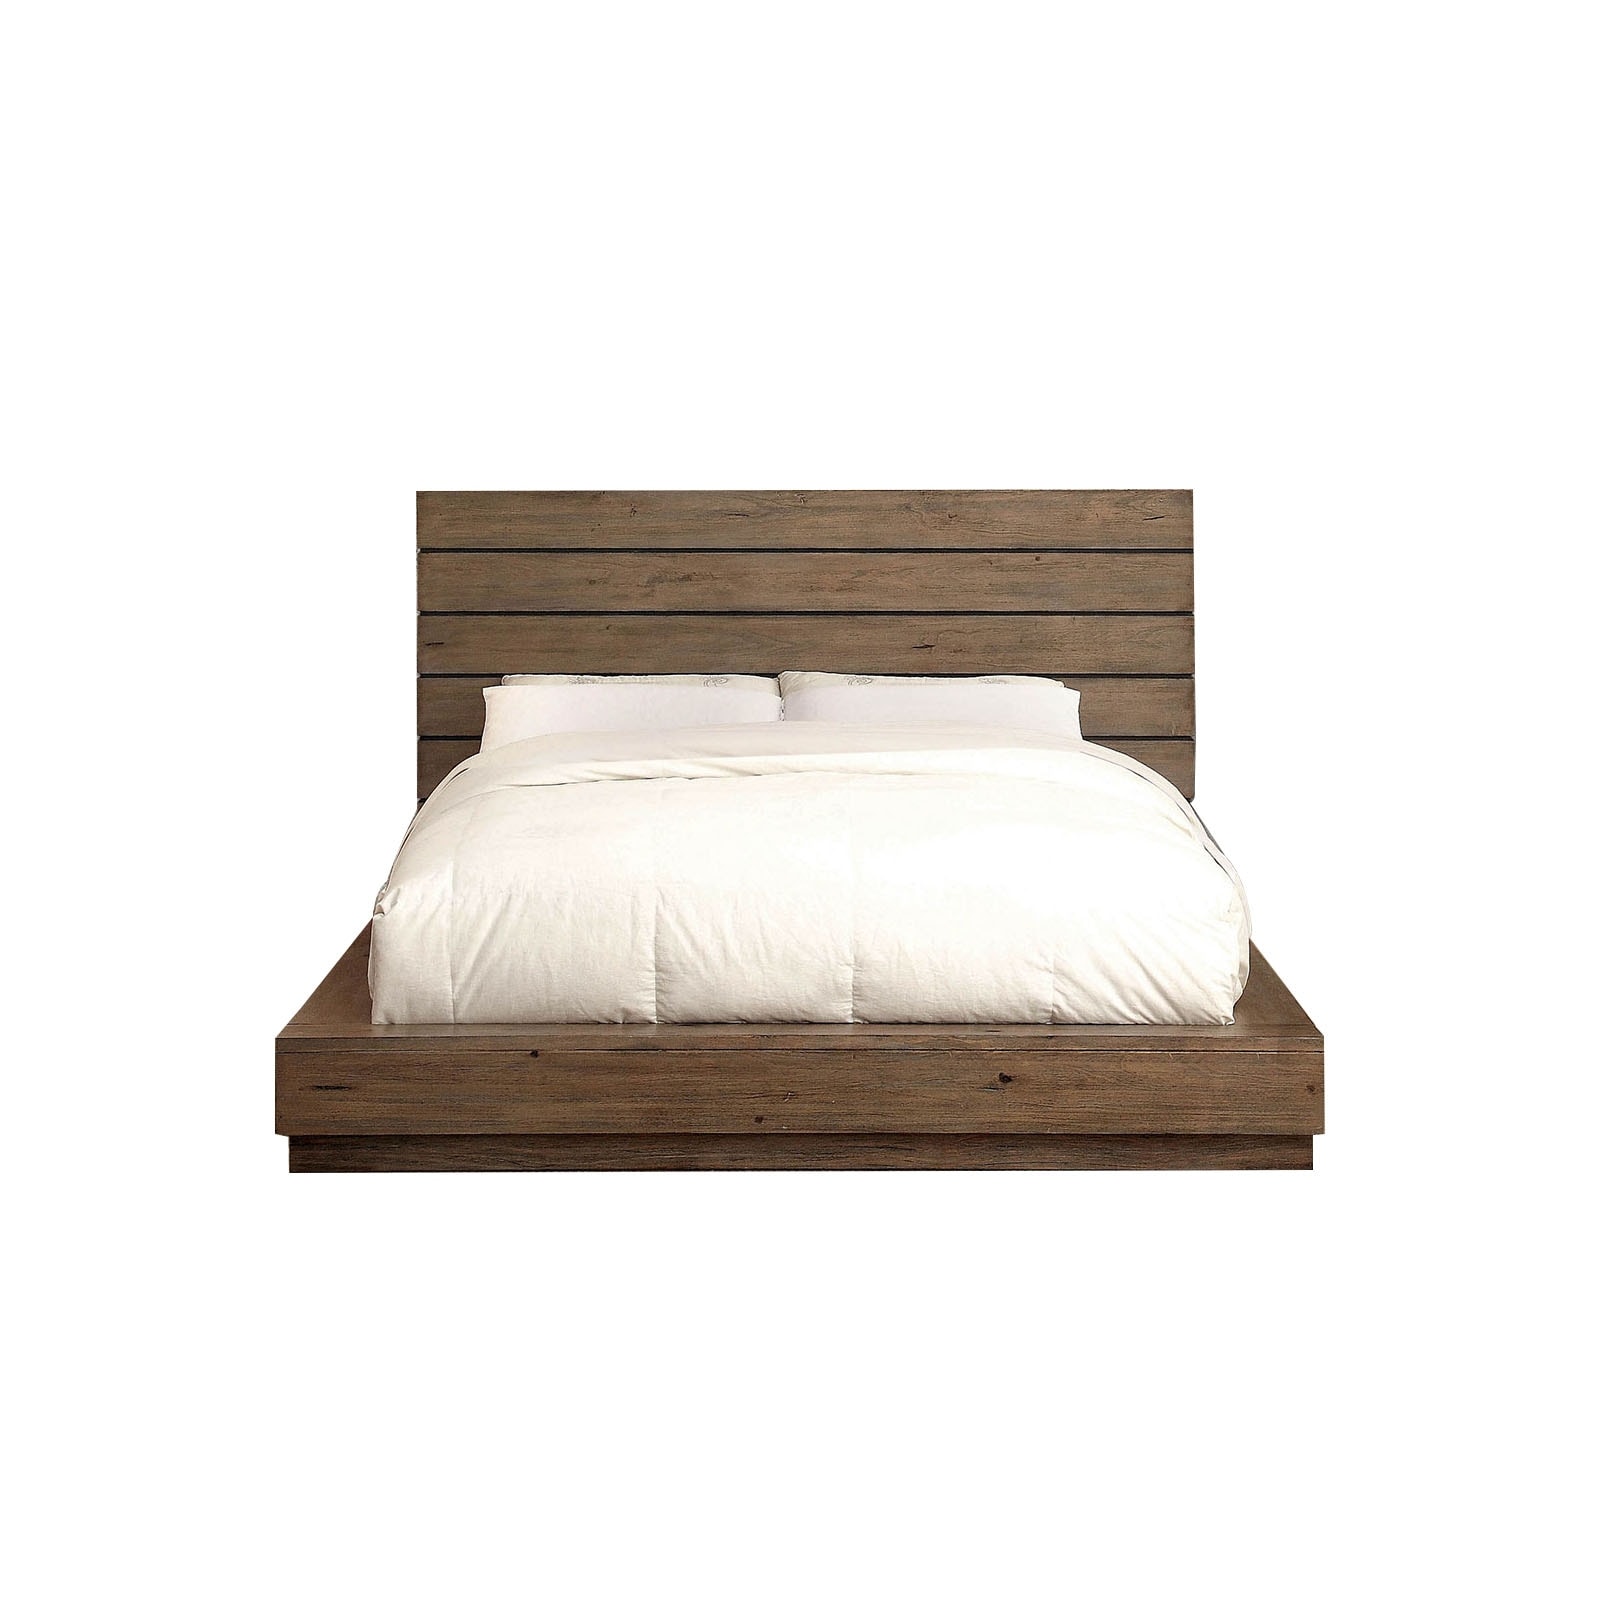 Wooden Bed In Rustic Natural Tone